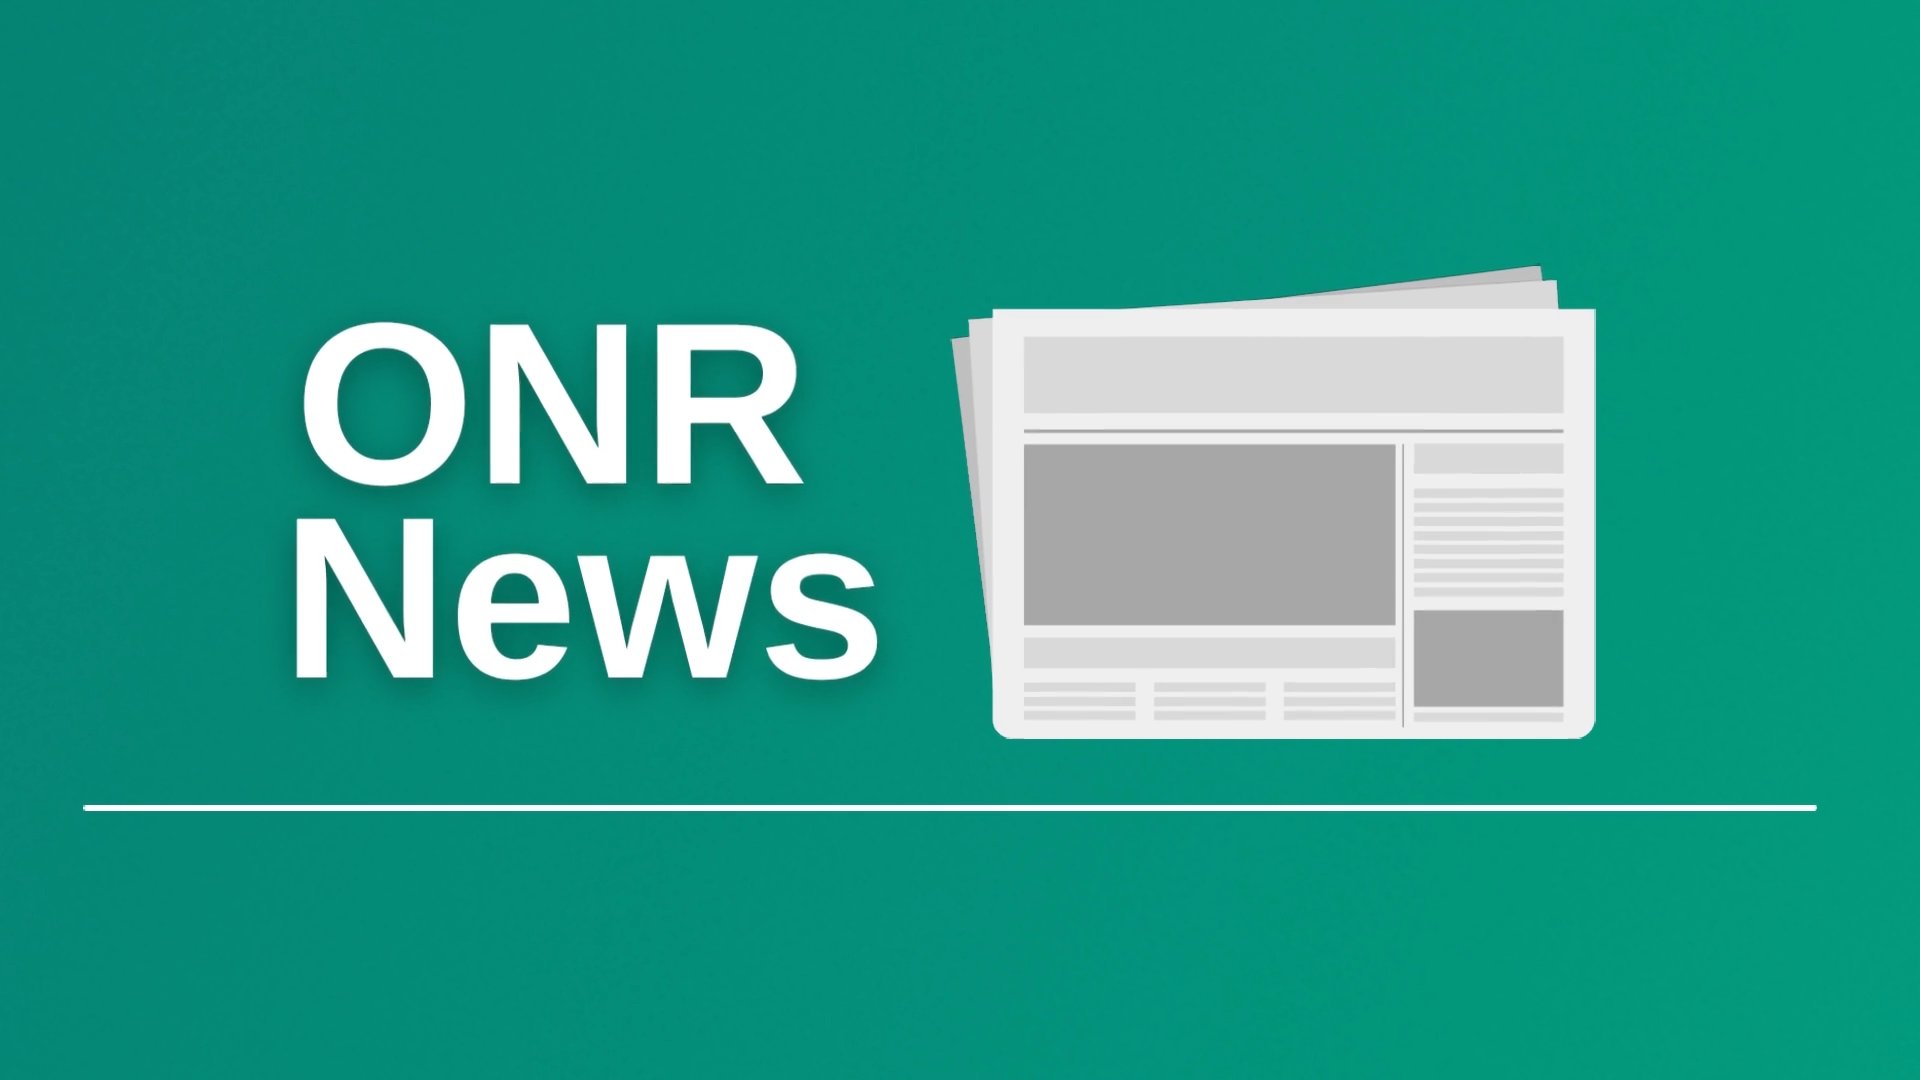 Office for Nuclear Regulation on X: Interested in regular updates on ONR's  regulatory activities? A new issue of our email newsletter, ONR News, will  be sent out tomorrow. Visit our website to